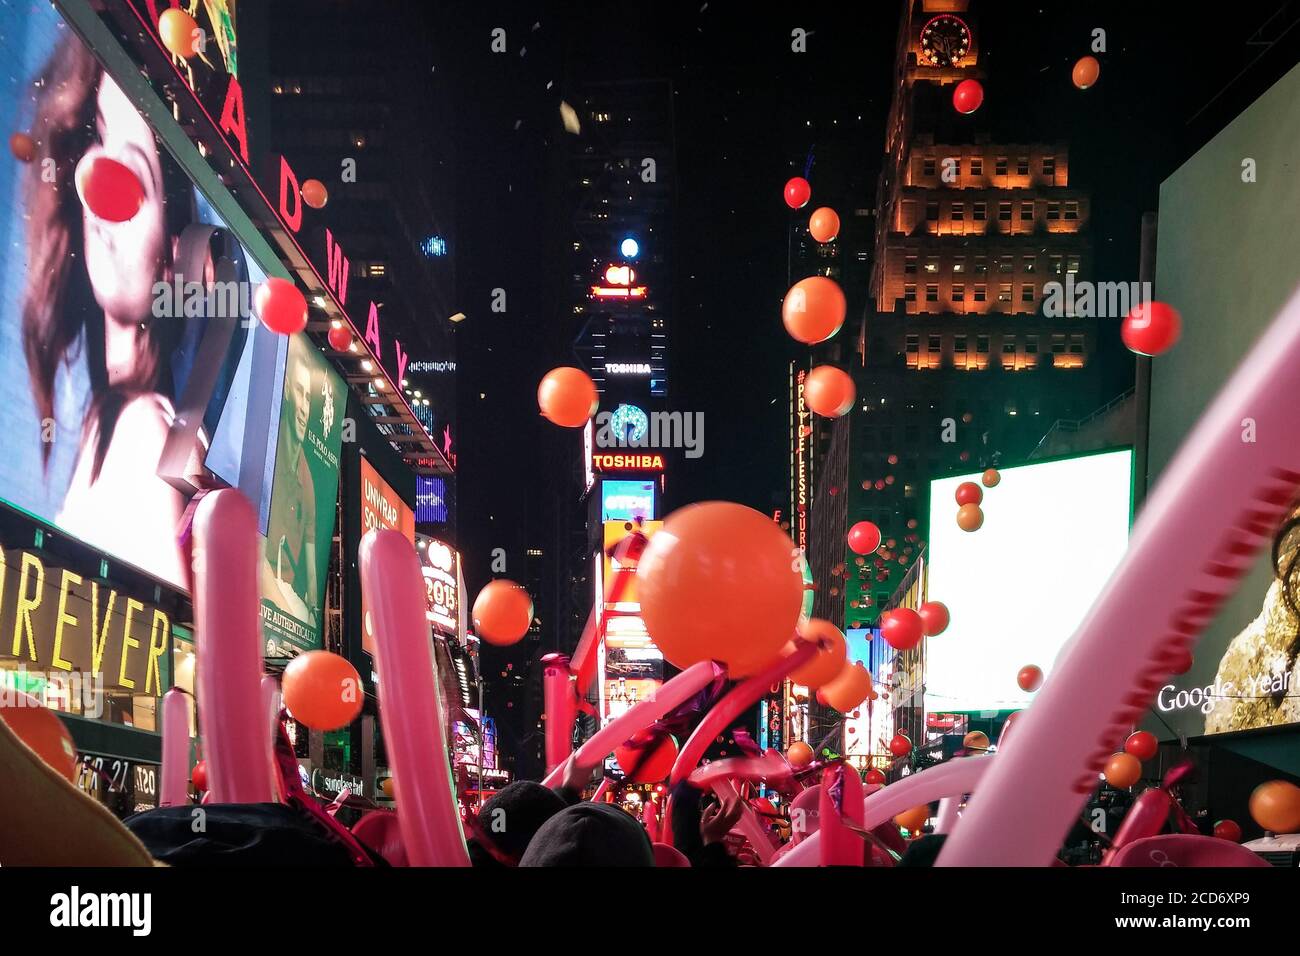 Manhattan, New York, United States of America - The Times Square New Year's Eve celebration famous for Ball Drop. Balloons falling from the sky. Stock Photo